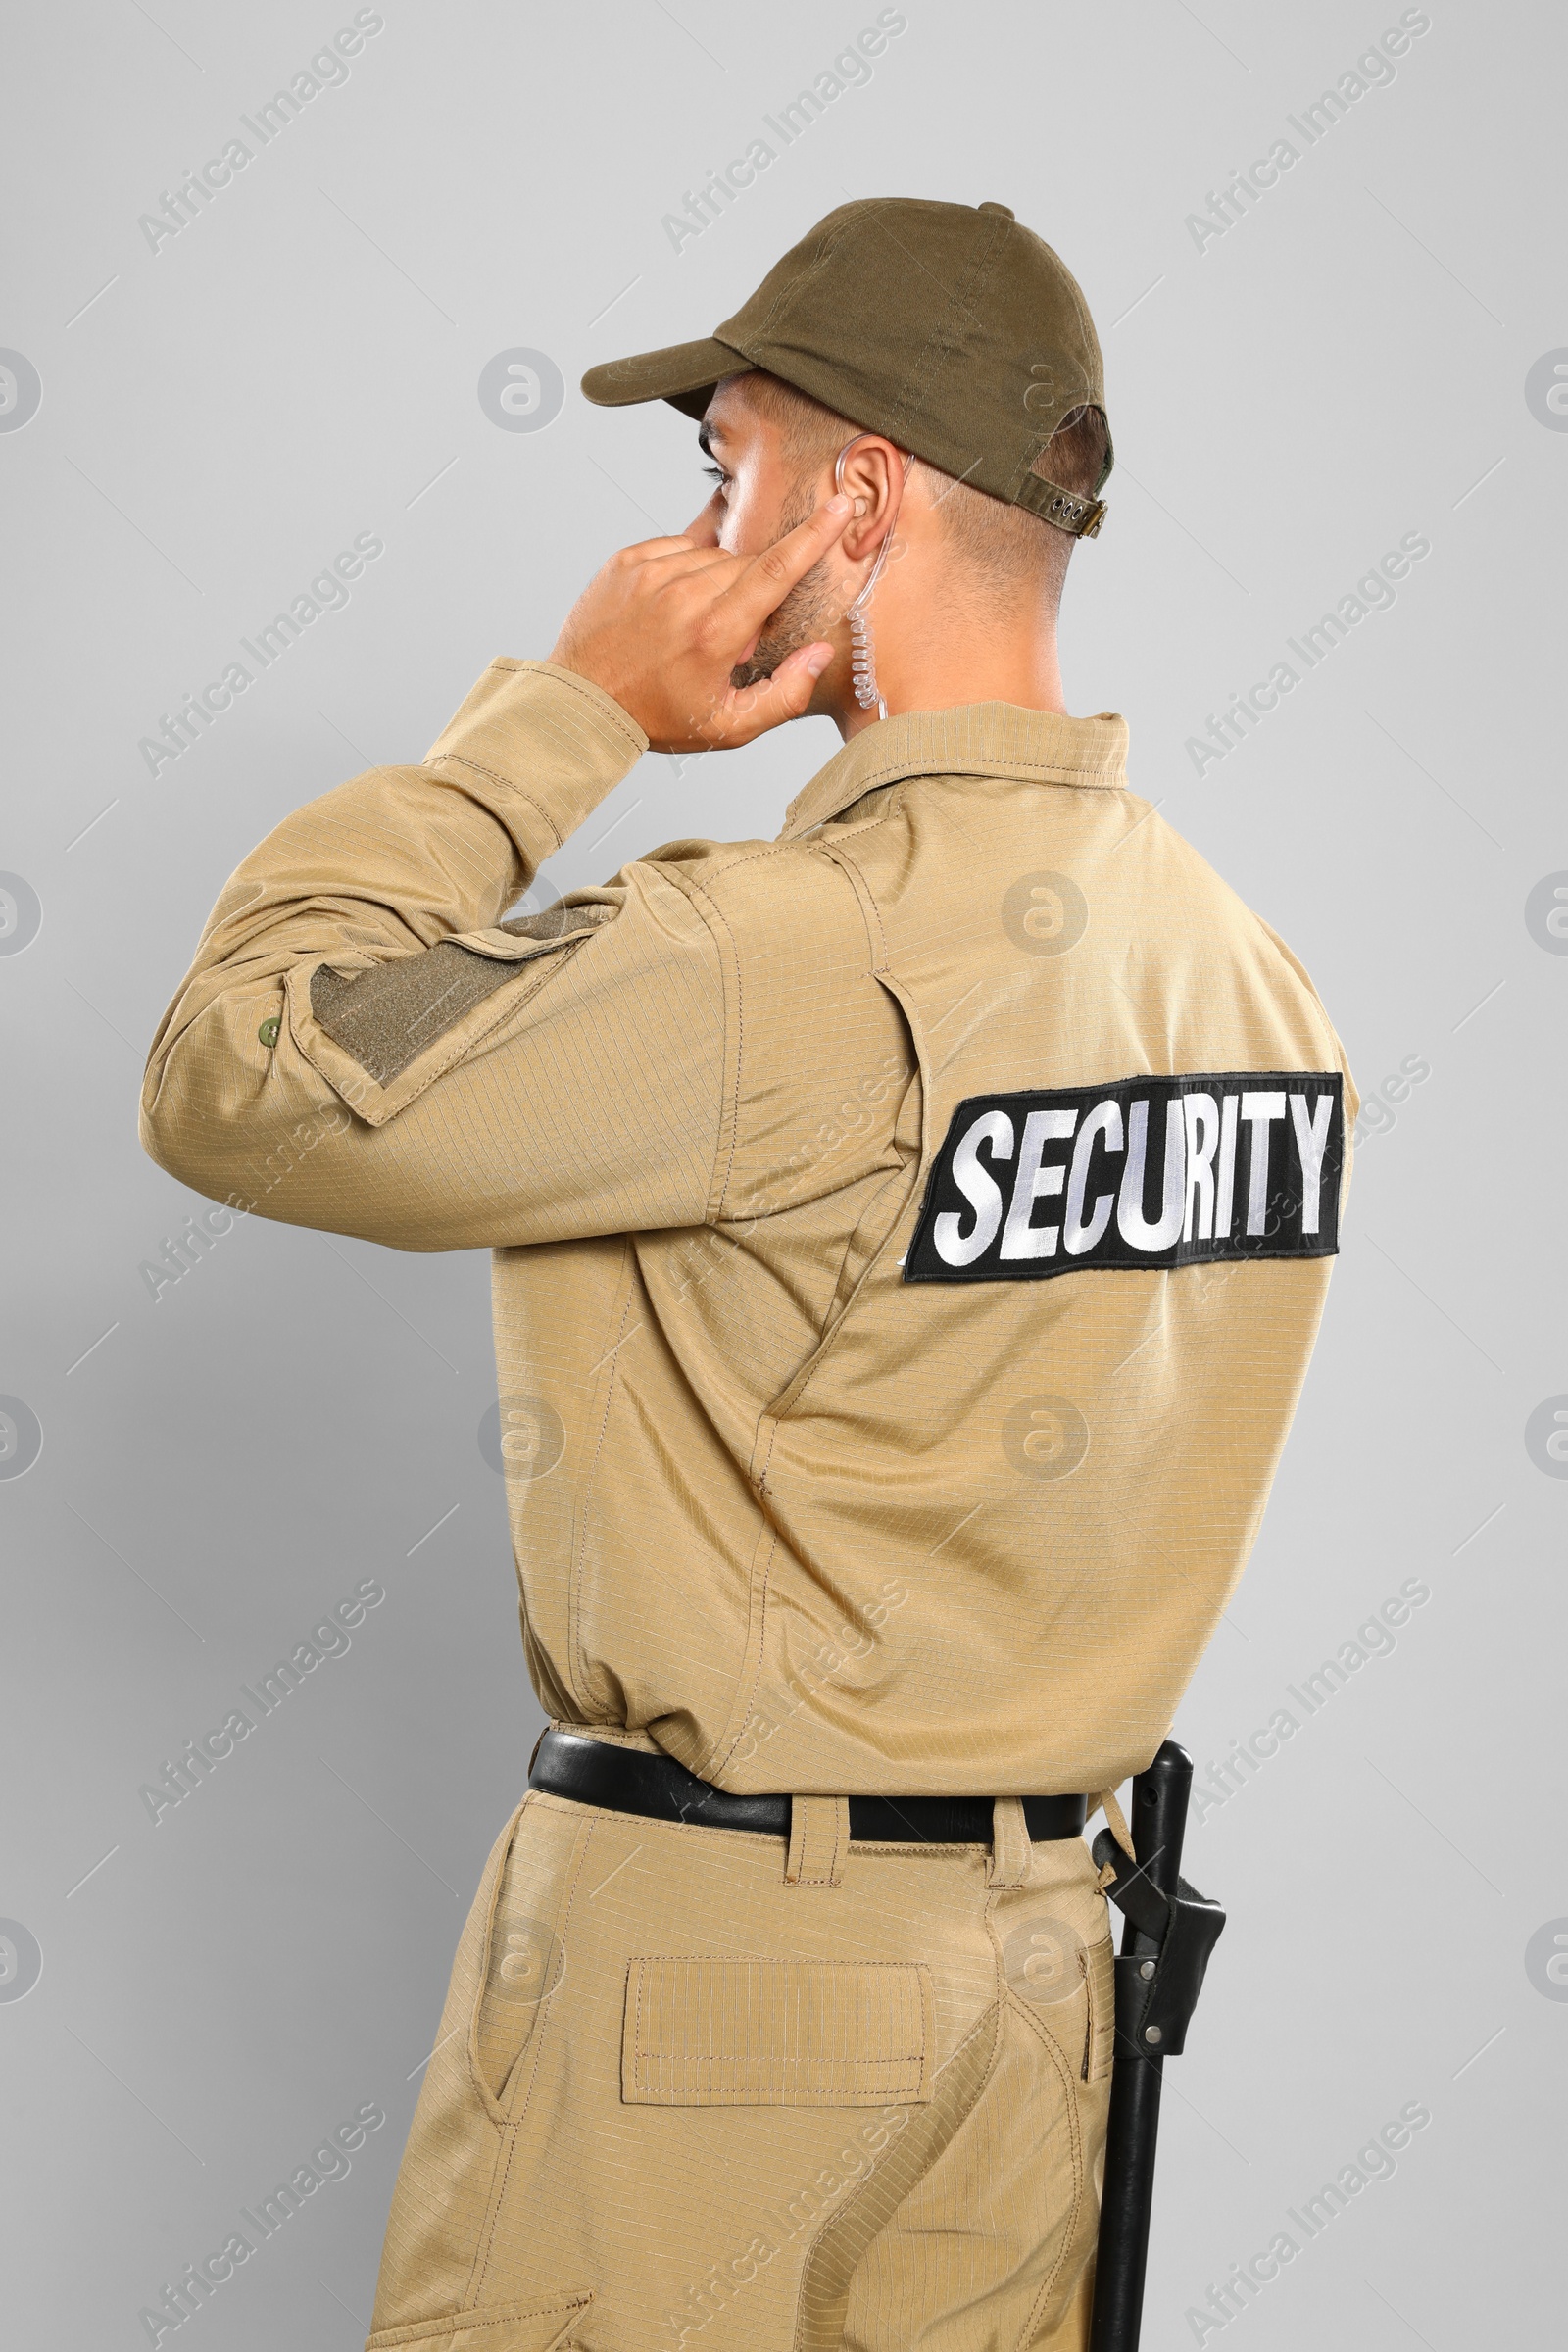 Photo of Male security guard in uniform using radio earpiece on grey background